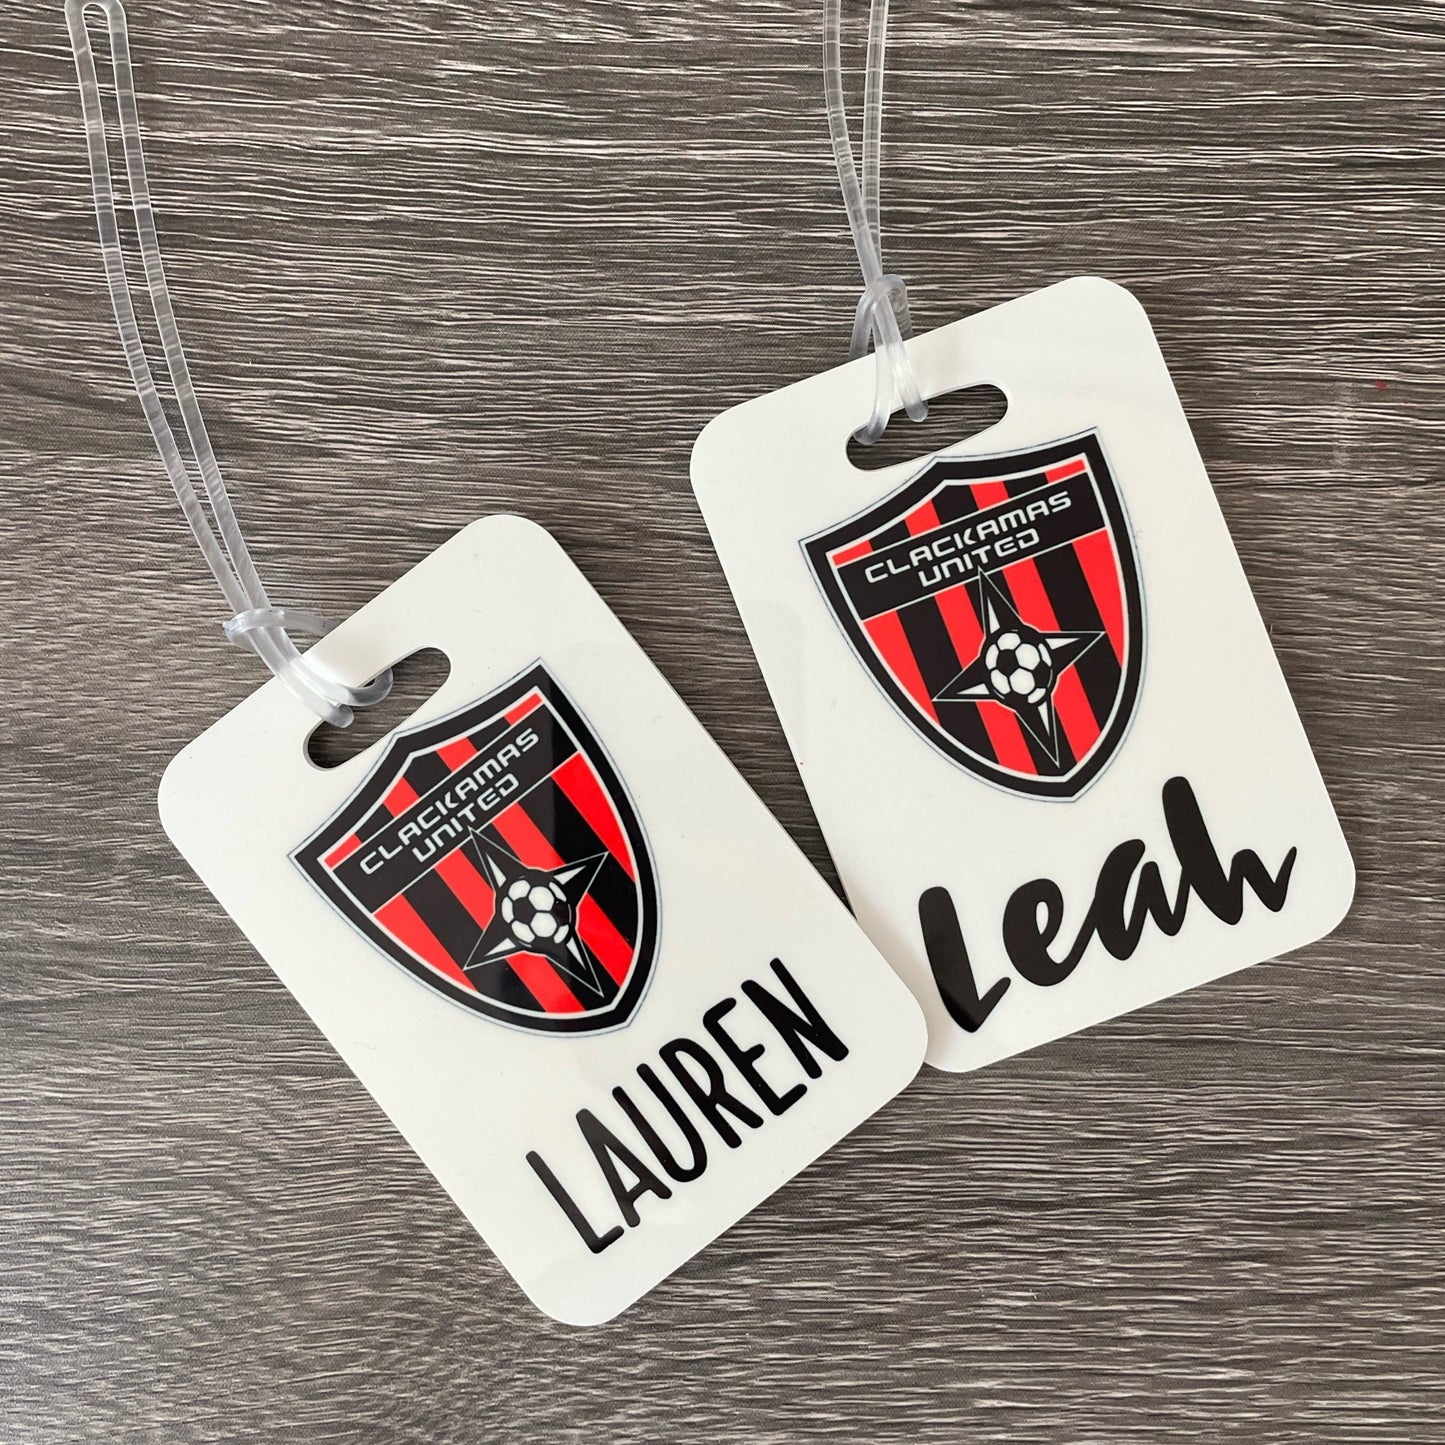 Personalized CUSC Bag Tag